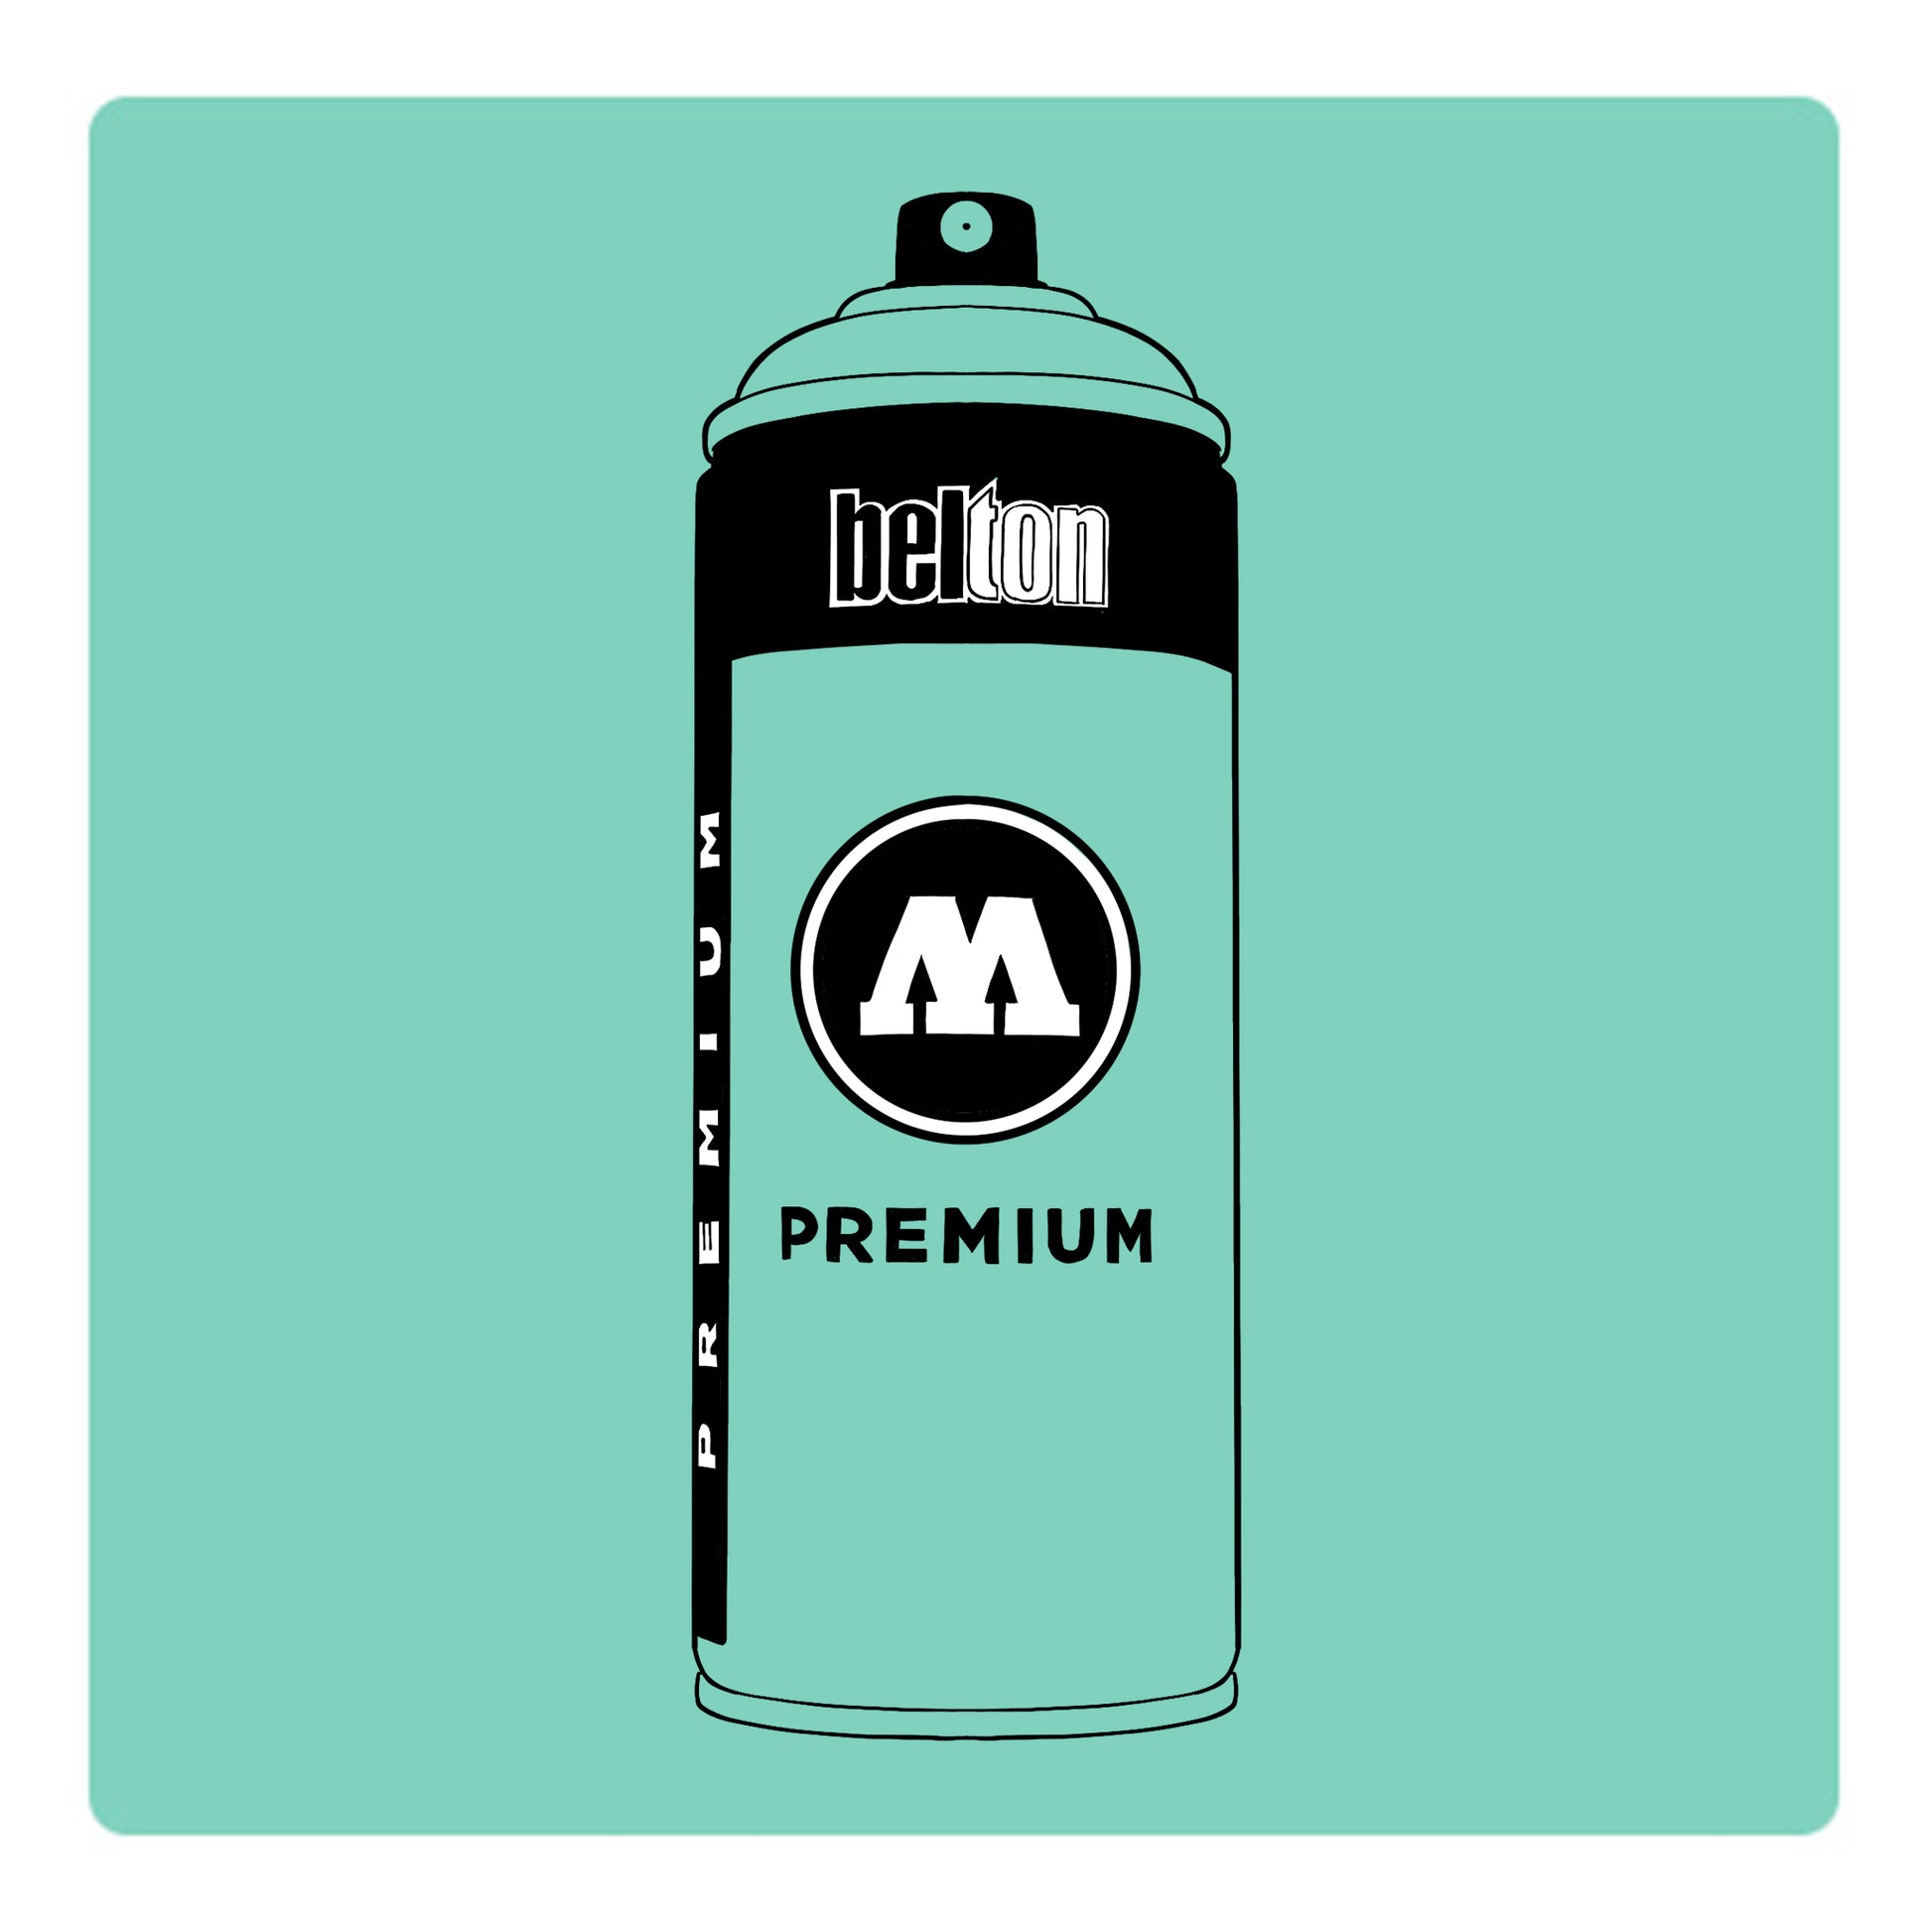 A black outline drawing of a light turquoise spray paint can with the words "belton","premium" and the letter"M" written on the face in black and white font. The background is a color swatch of the same Light Turquoise with a white border.